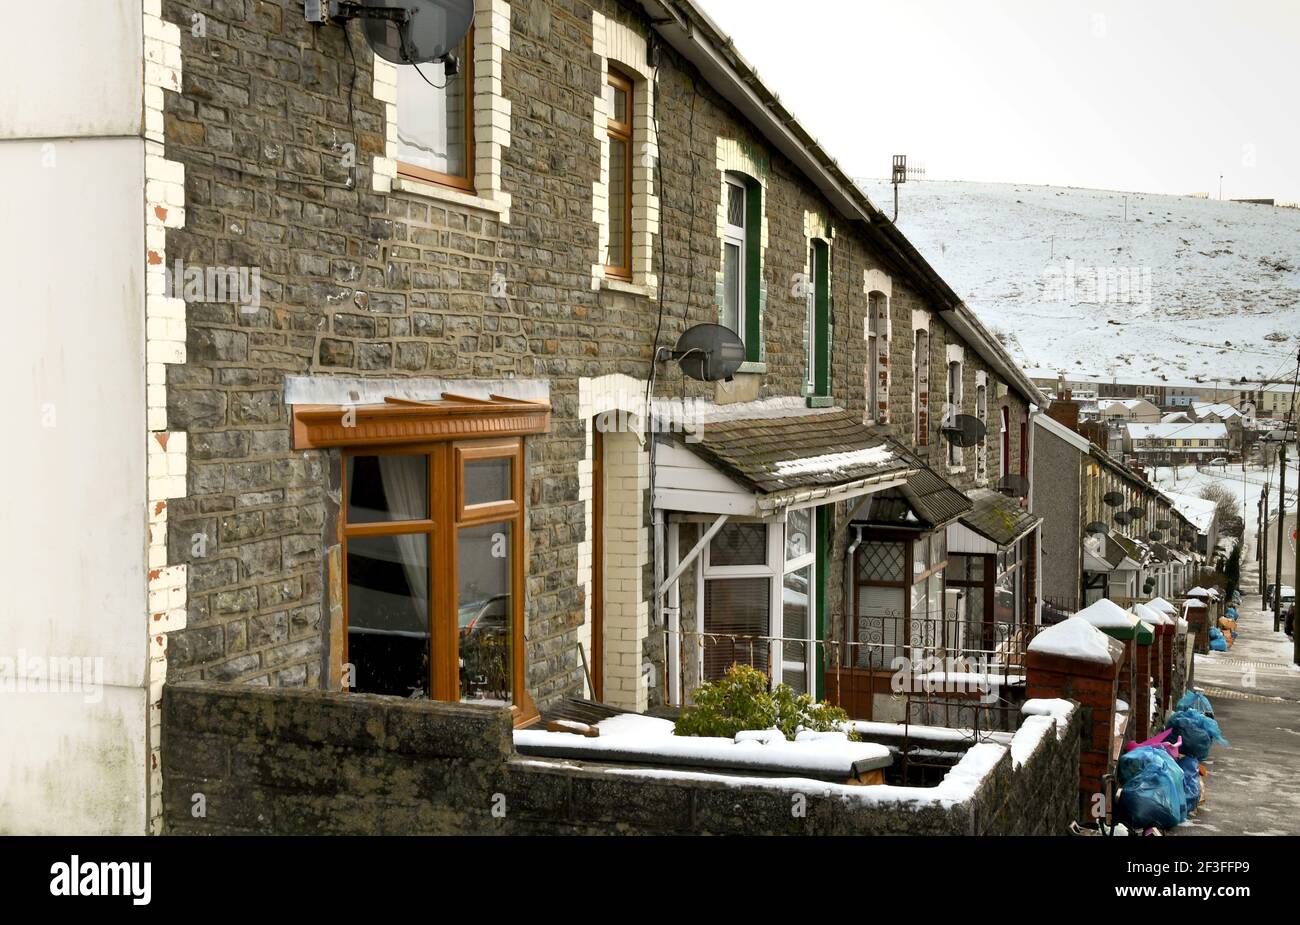 Gilfach Goch, Wales - December 2017: Street view with terraced houses in a village in one of the South Wales valleys Stock Photo